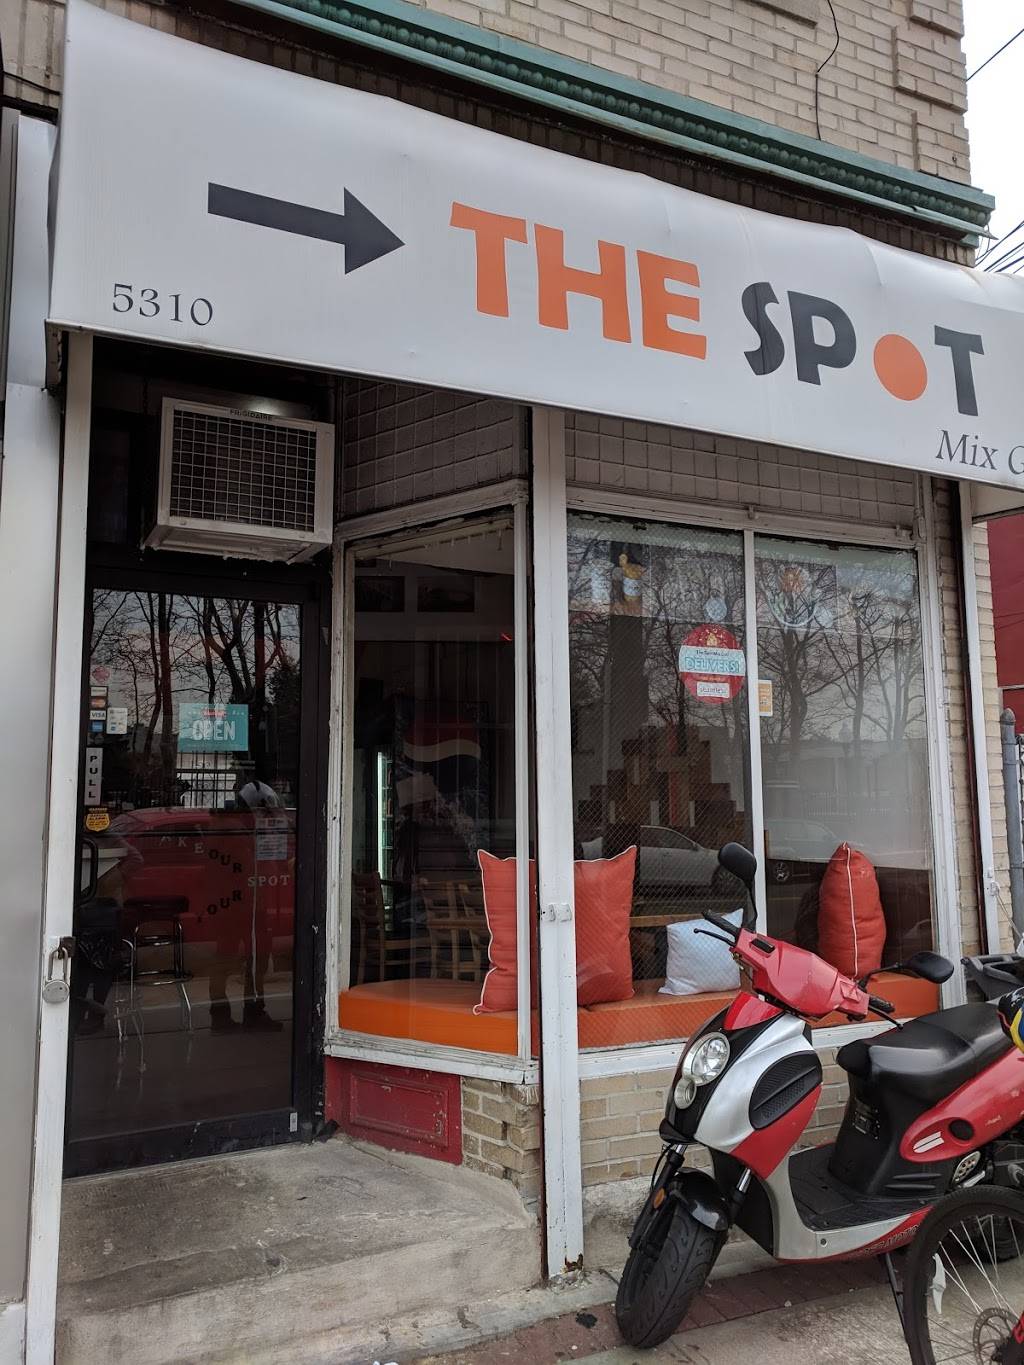 The Spot Mix Grill | restaurant | 5310 Park Ave, West New York, NJ 07093, USA | 2018677768 OR +1 201-867-7768